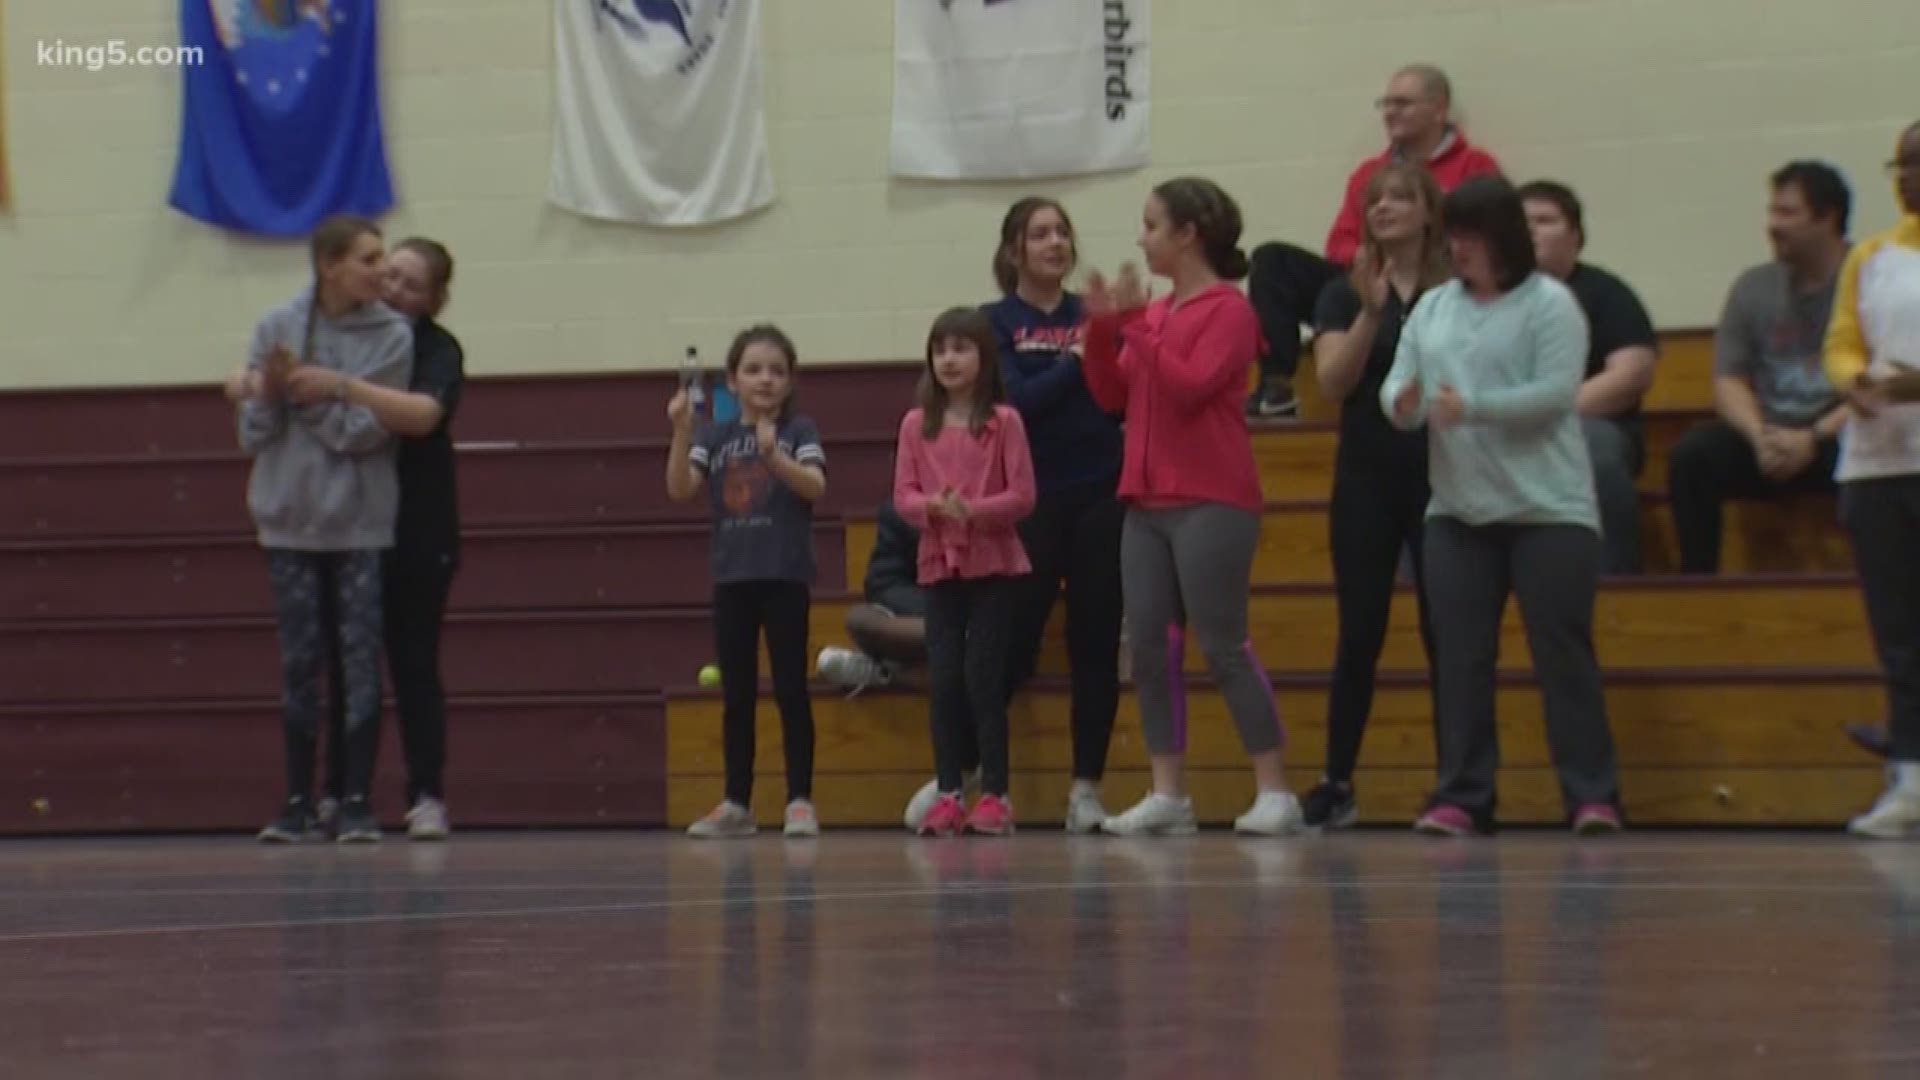 Three years ago, a teenager at Joint Base Lewis McChord had a dream of starting a cheer team for kids with special needs. Today, the JBLM Tigers light up the sidelines at other special olympics team sports, while building important connections. They are one of the first squads of their kind in the state.